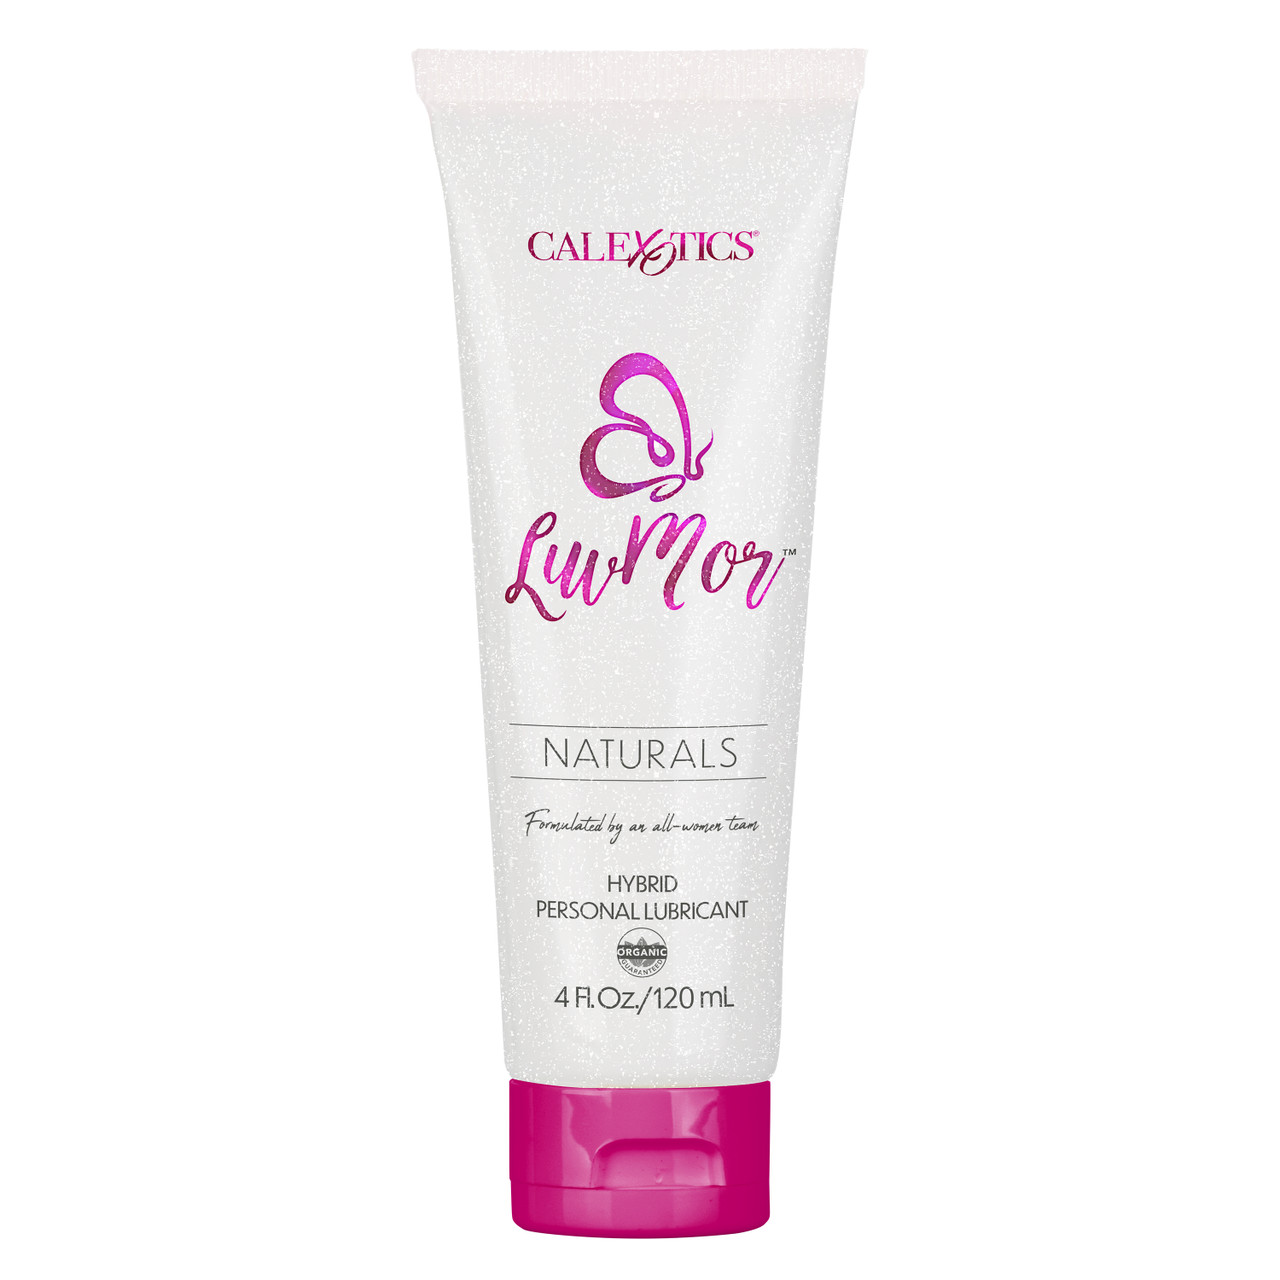 LUVMOR NATURALS HYBRID PERSONAL LUBRICANT 4OZ - Click Image to Close